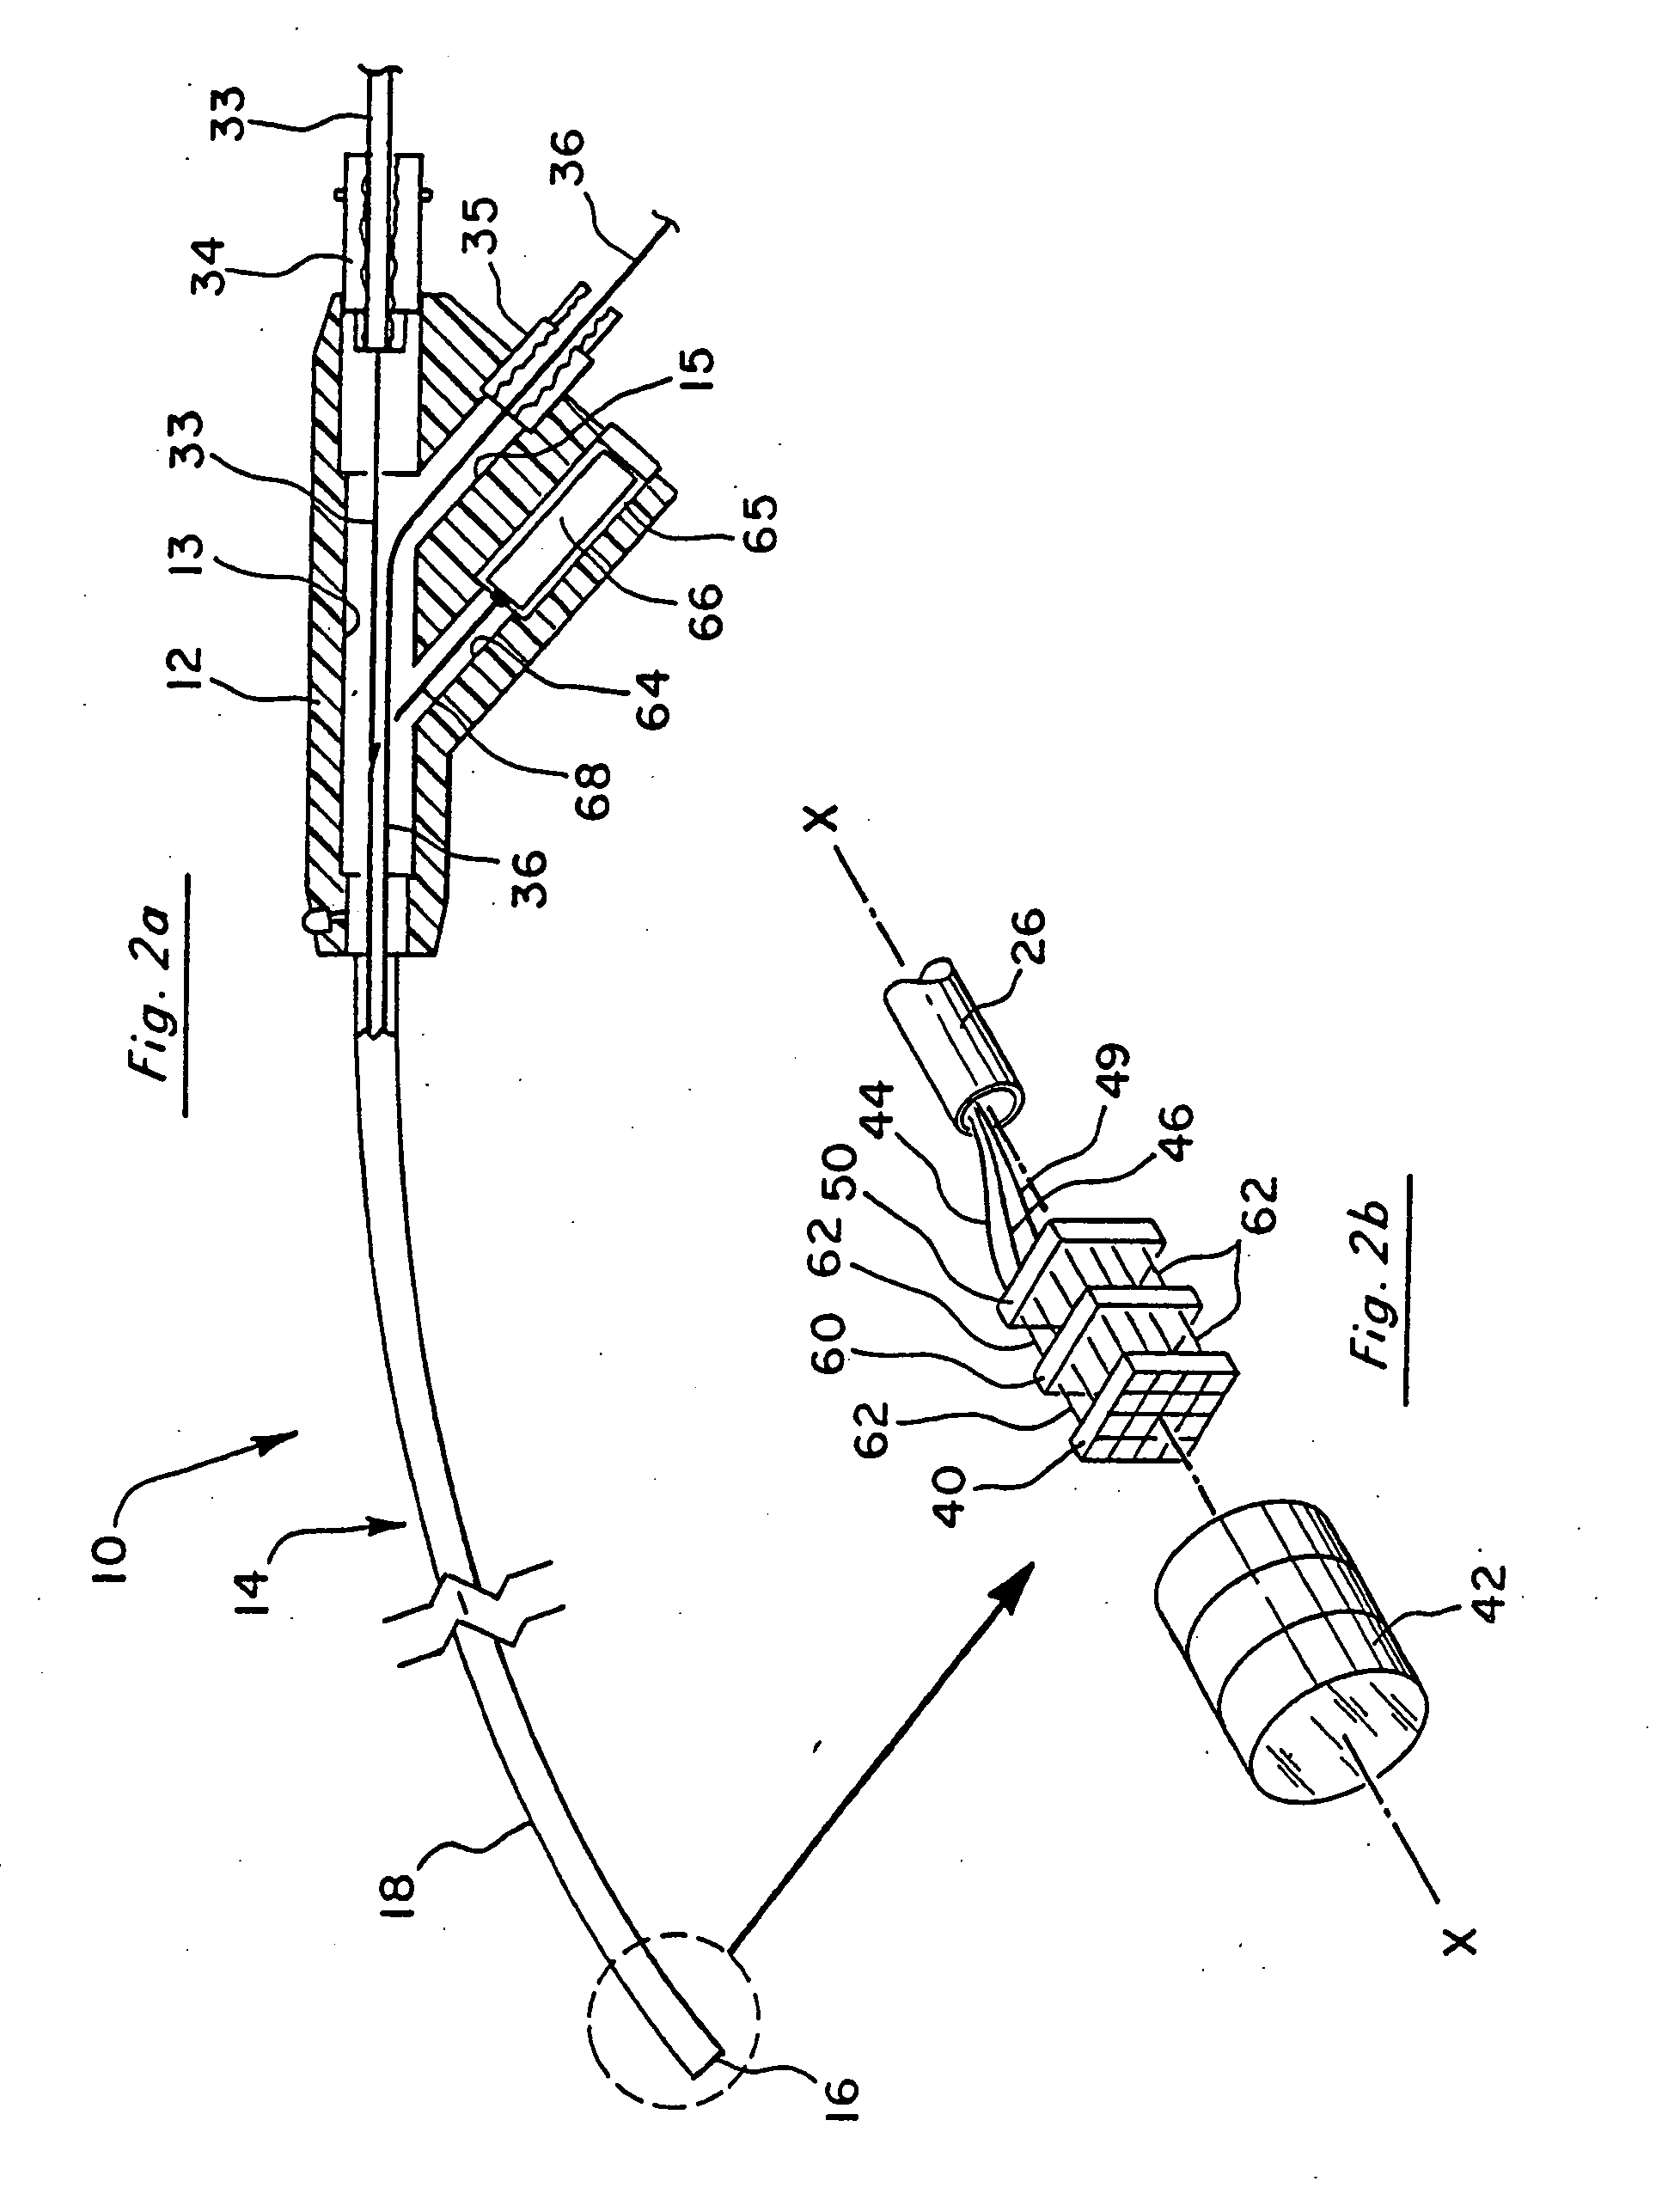 Reduced area imaging device incorporated within wireless endoscopic devices